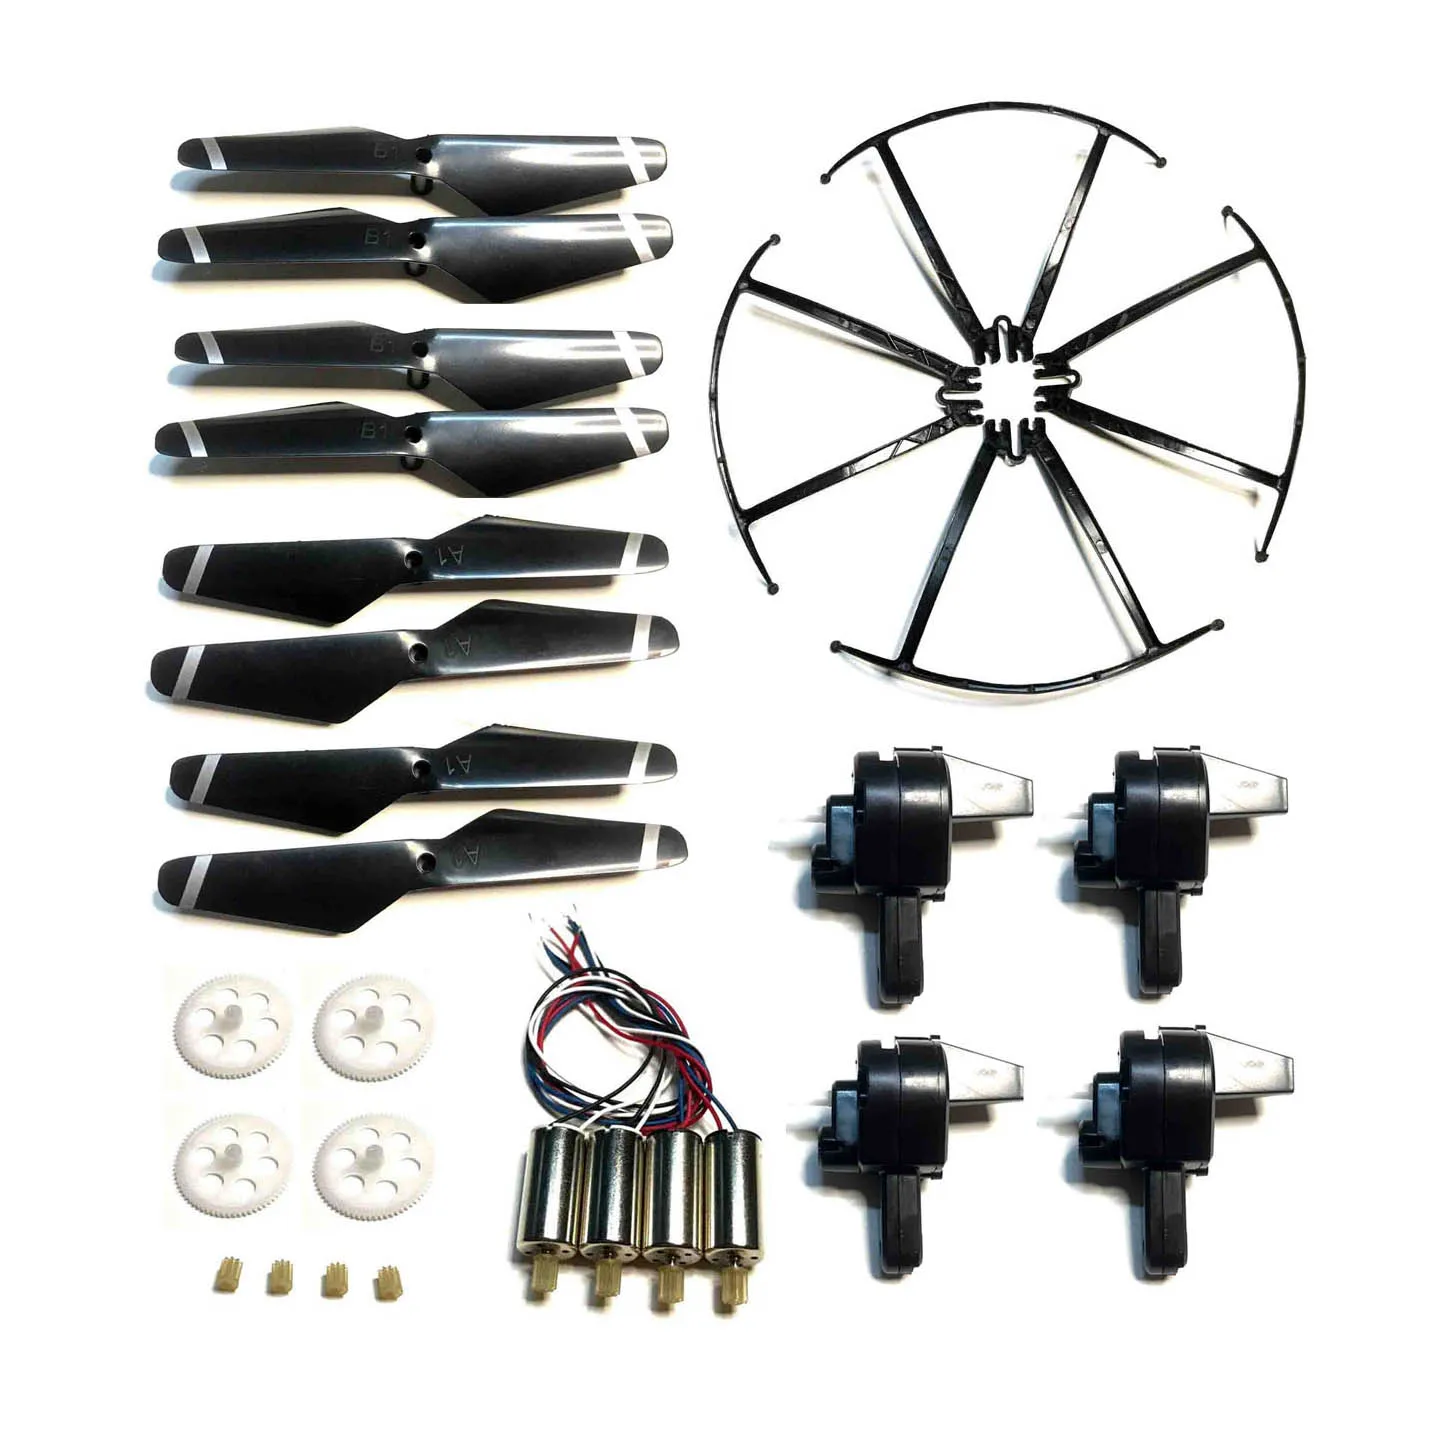 

S60 WiFi fpv Drone Quadcopter Helicopter Spare Parts body Propeller Blades Guard Arm Motors Engines Gear Accessories